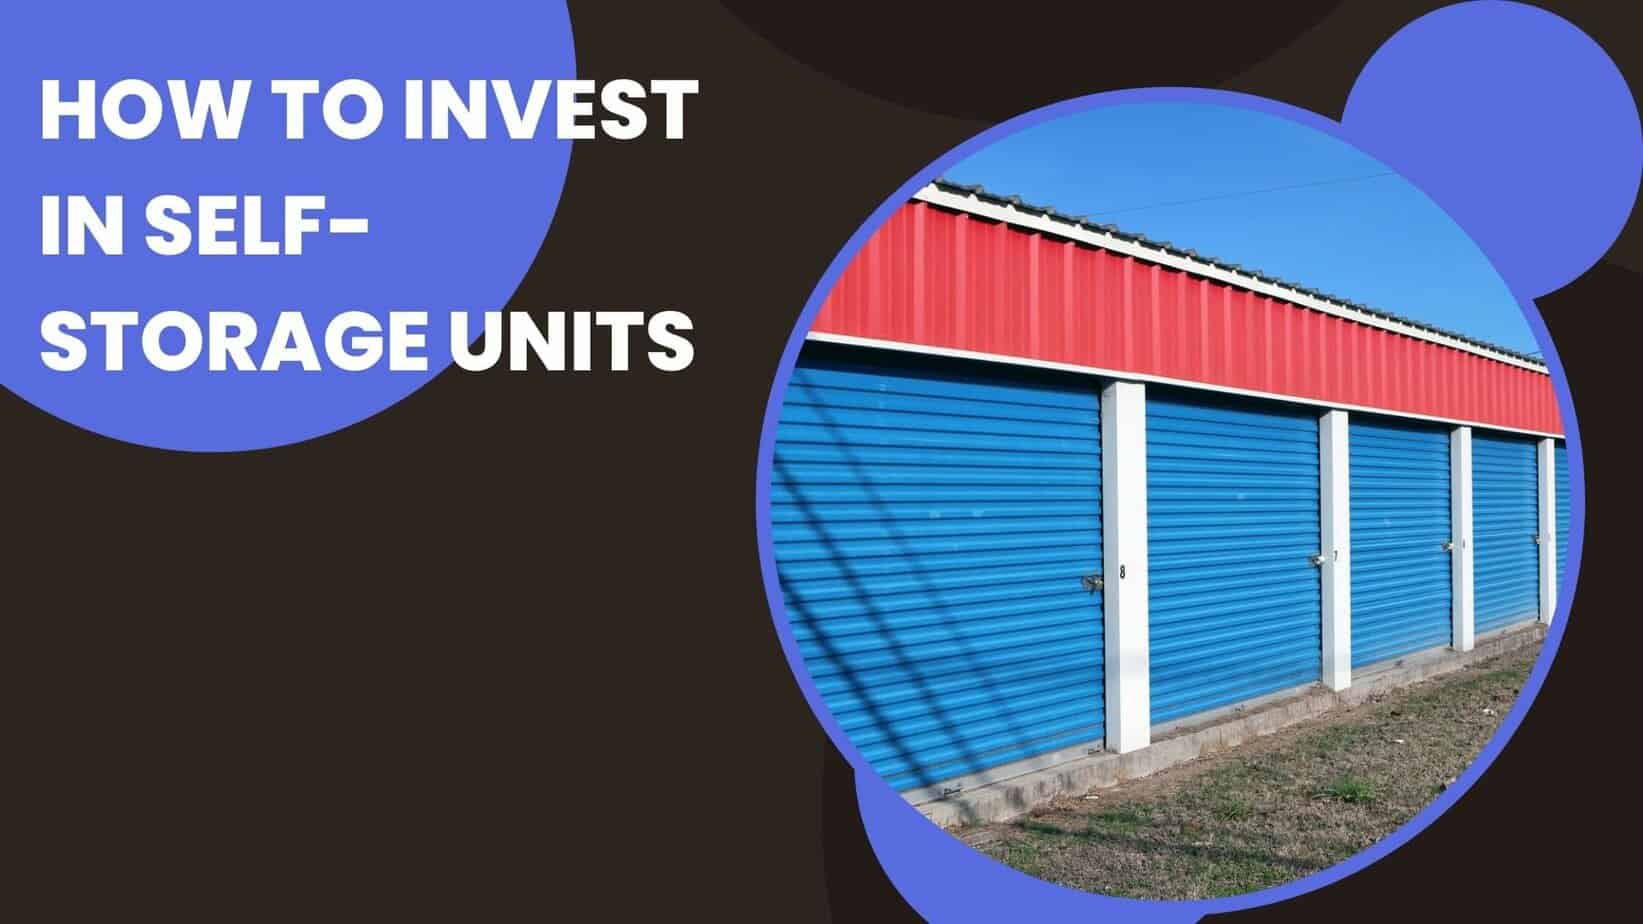 How to Invest in Self-Storage Units